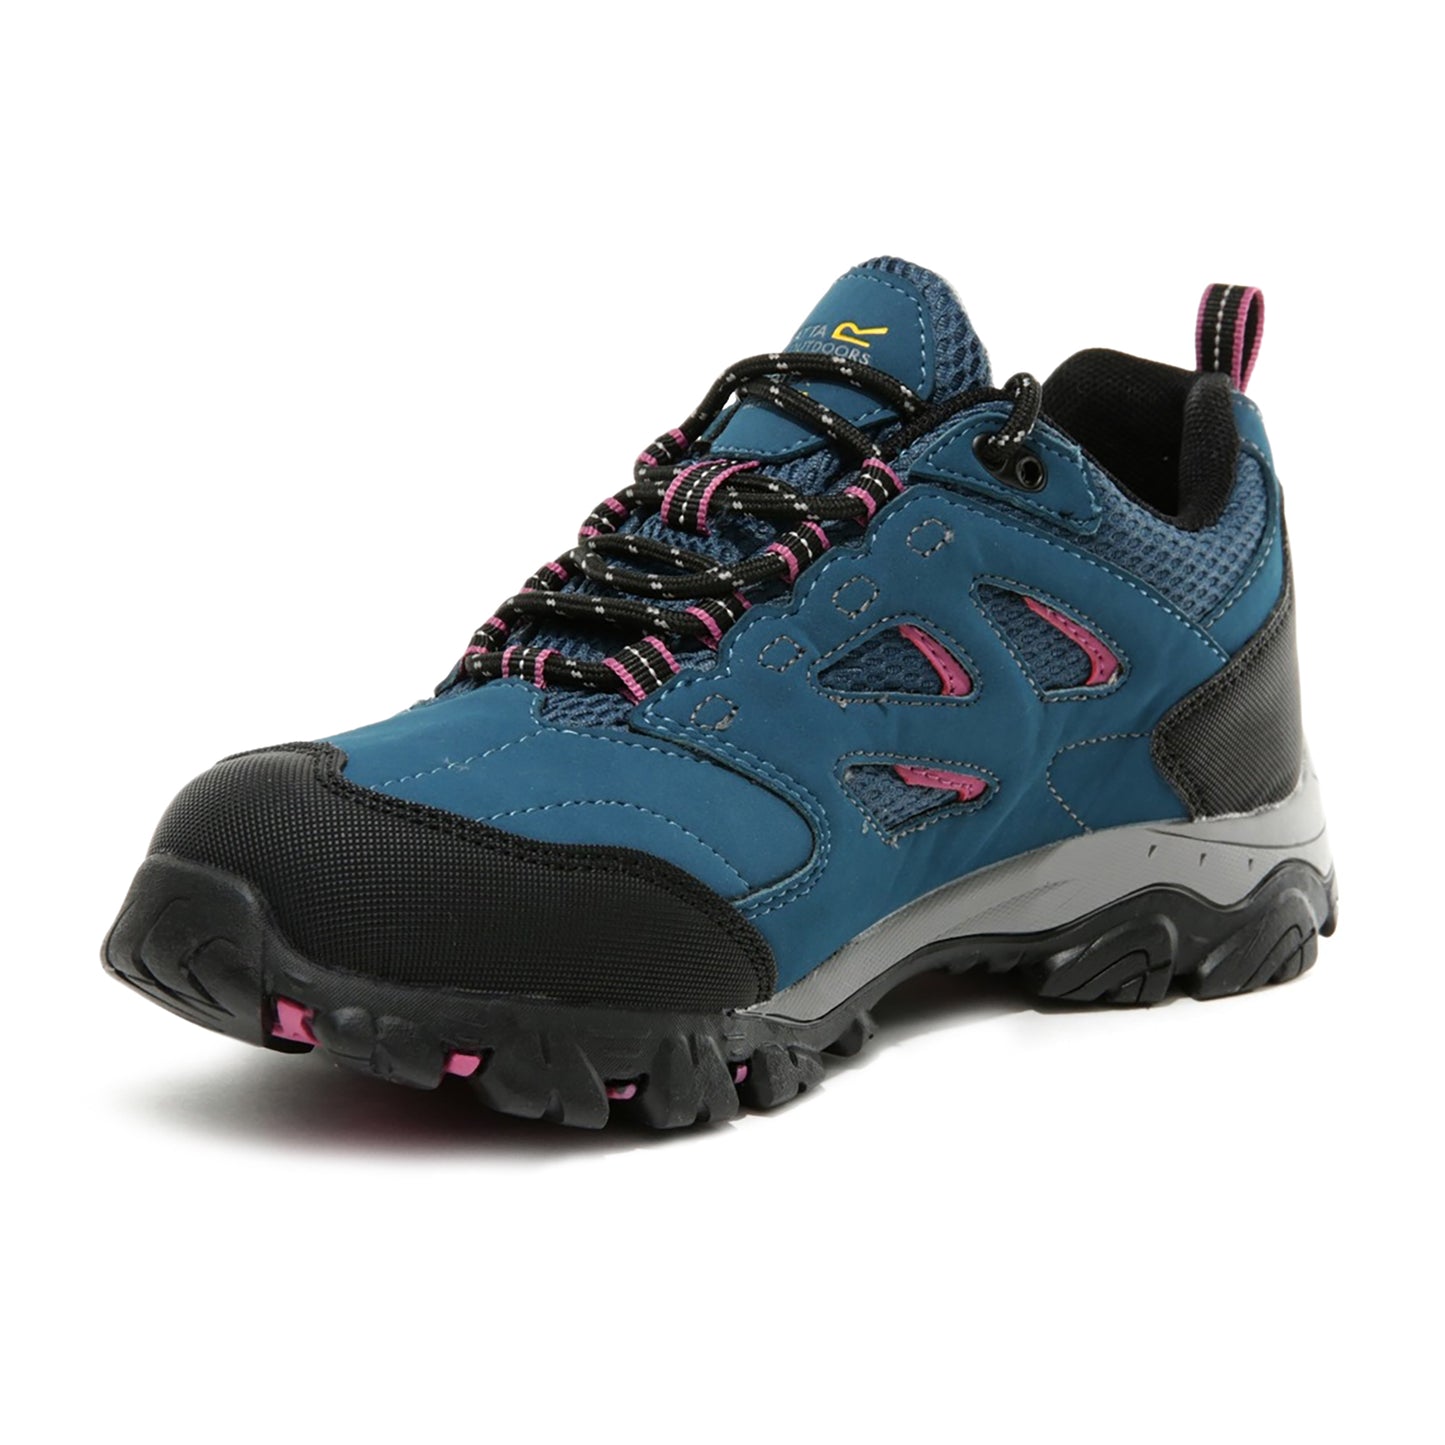 Holcombe Waterproof Low Walking Shoes - Moroccan Blue Red Violet